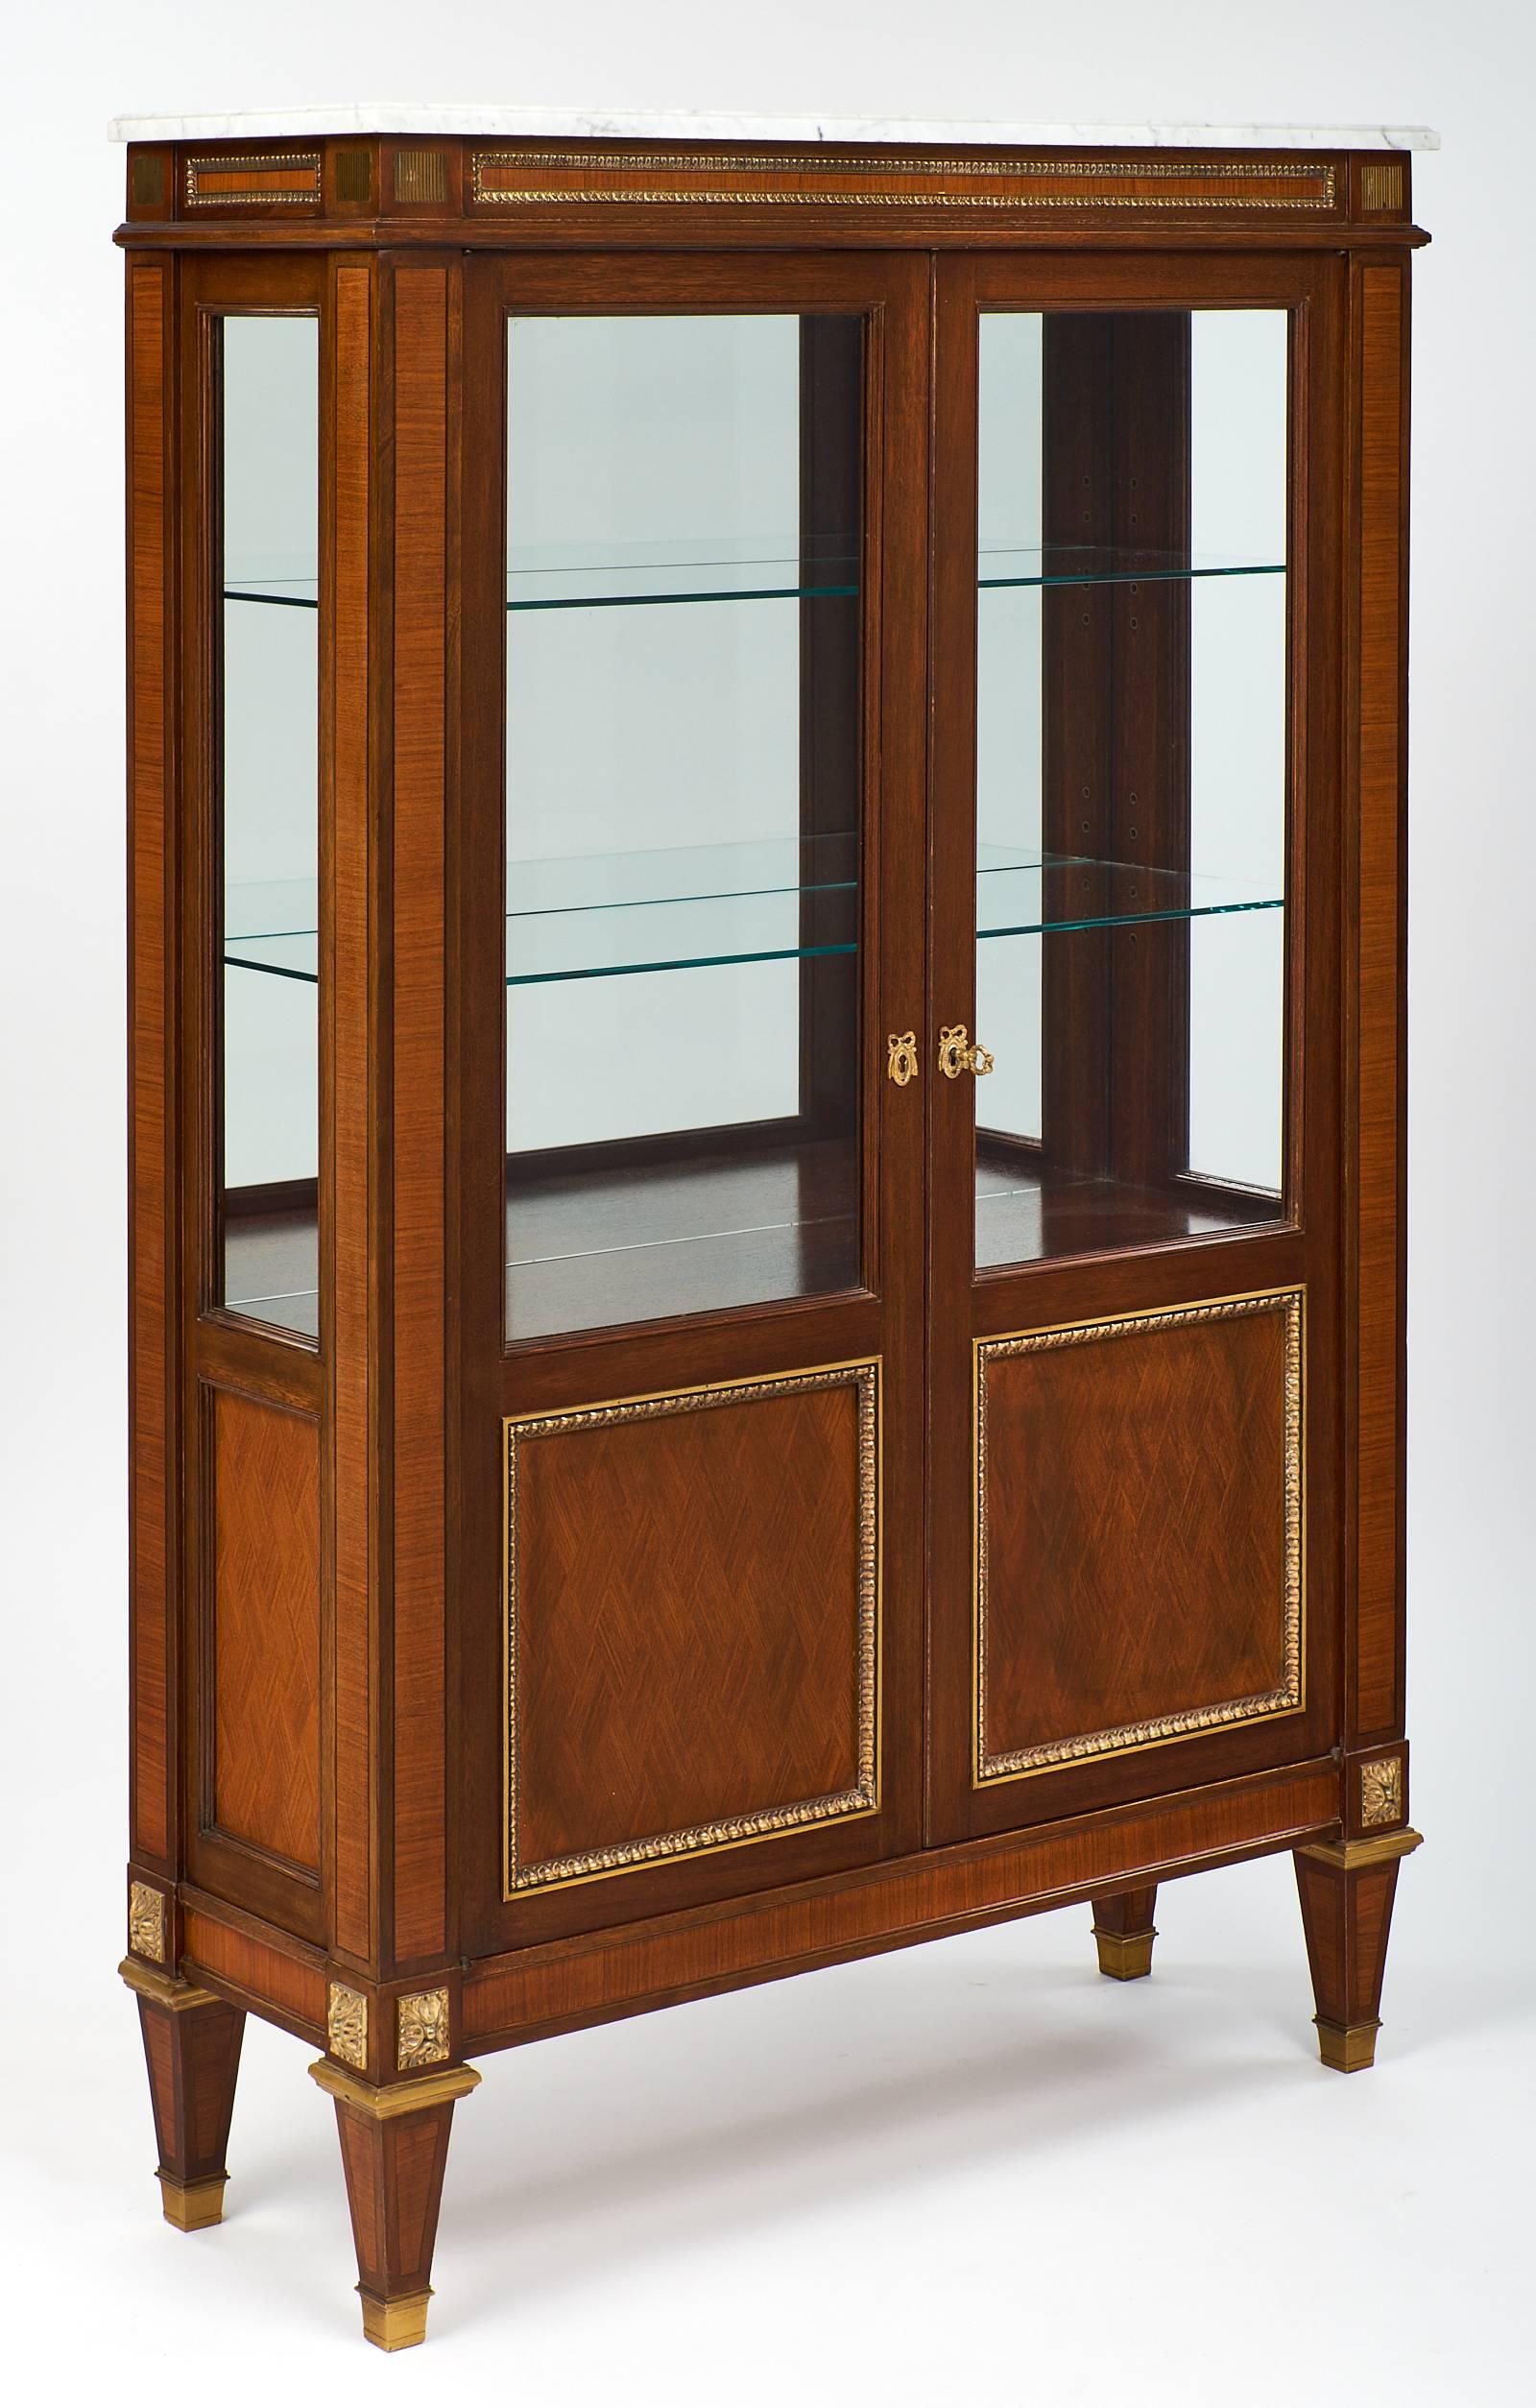 Louis XVI style bookcase with refined and elegant rosewood parquetry, marquetry, and tinted rosewood and burled ash on the panels. This piece has finely cast ormolu, feet, and trims, as well as a wonderful Carrara marble top. This vitrine has a